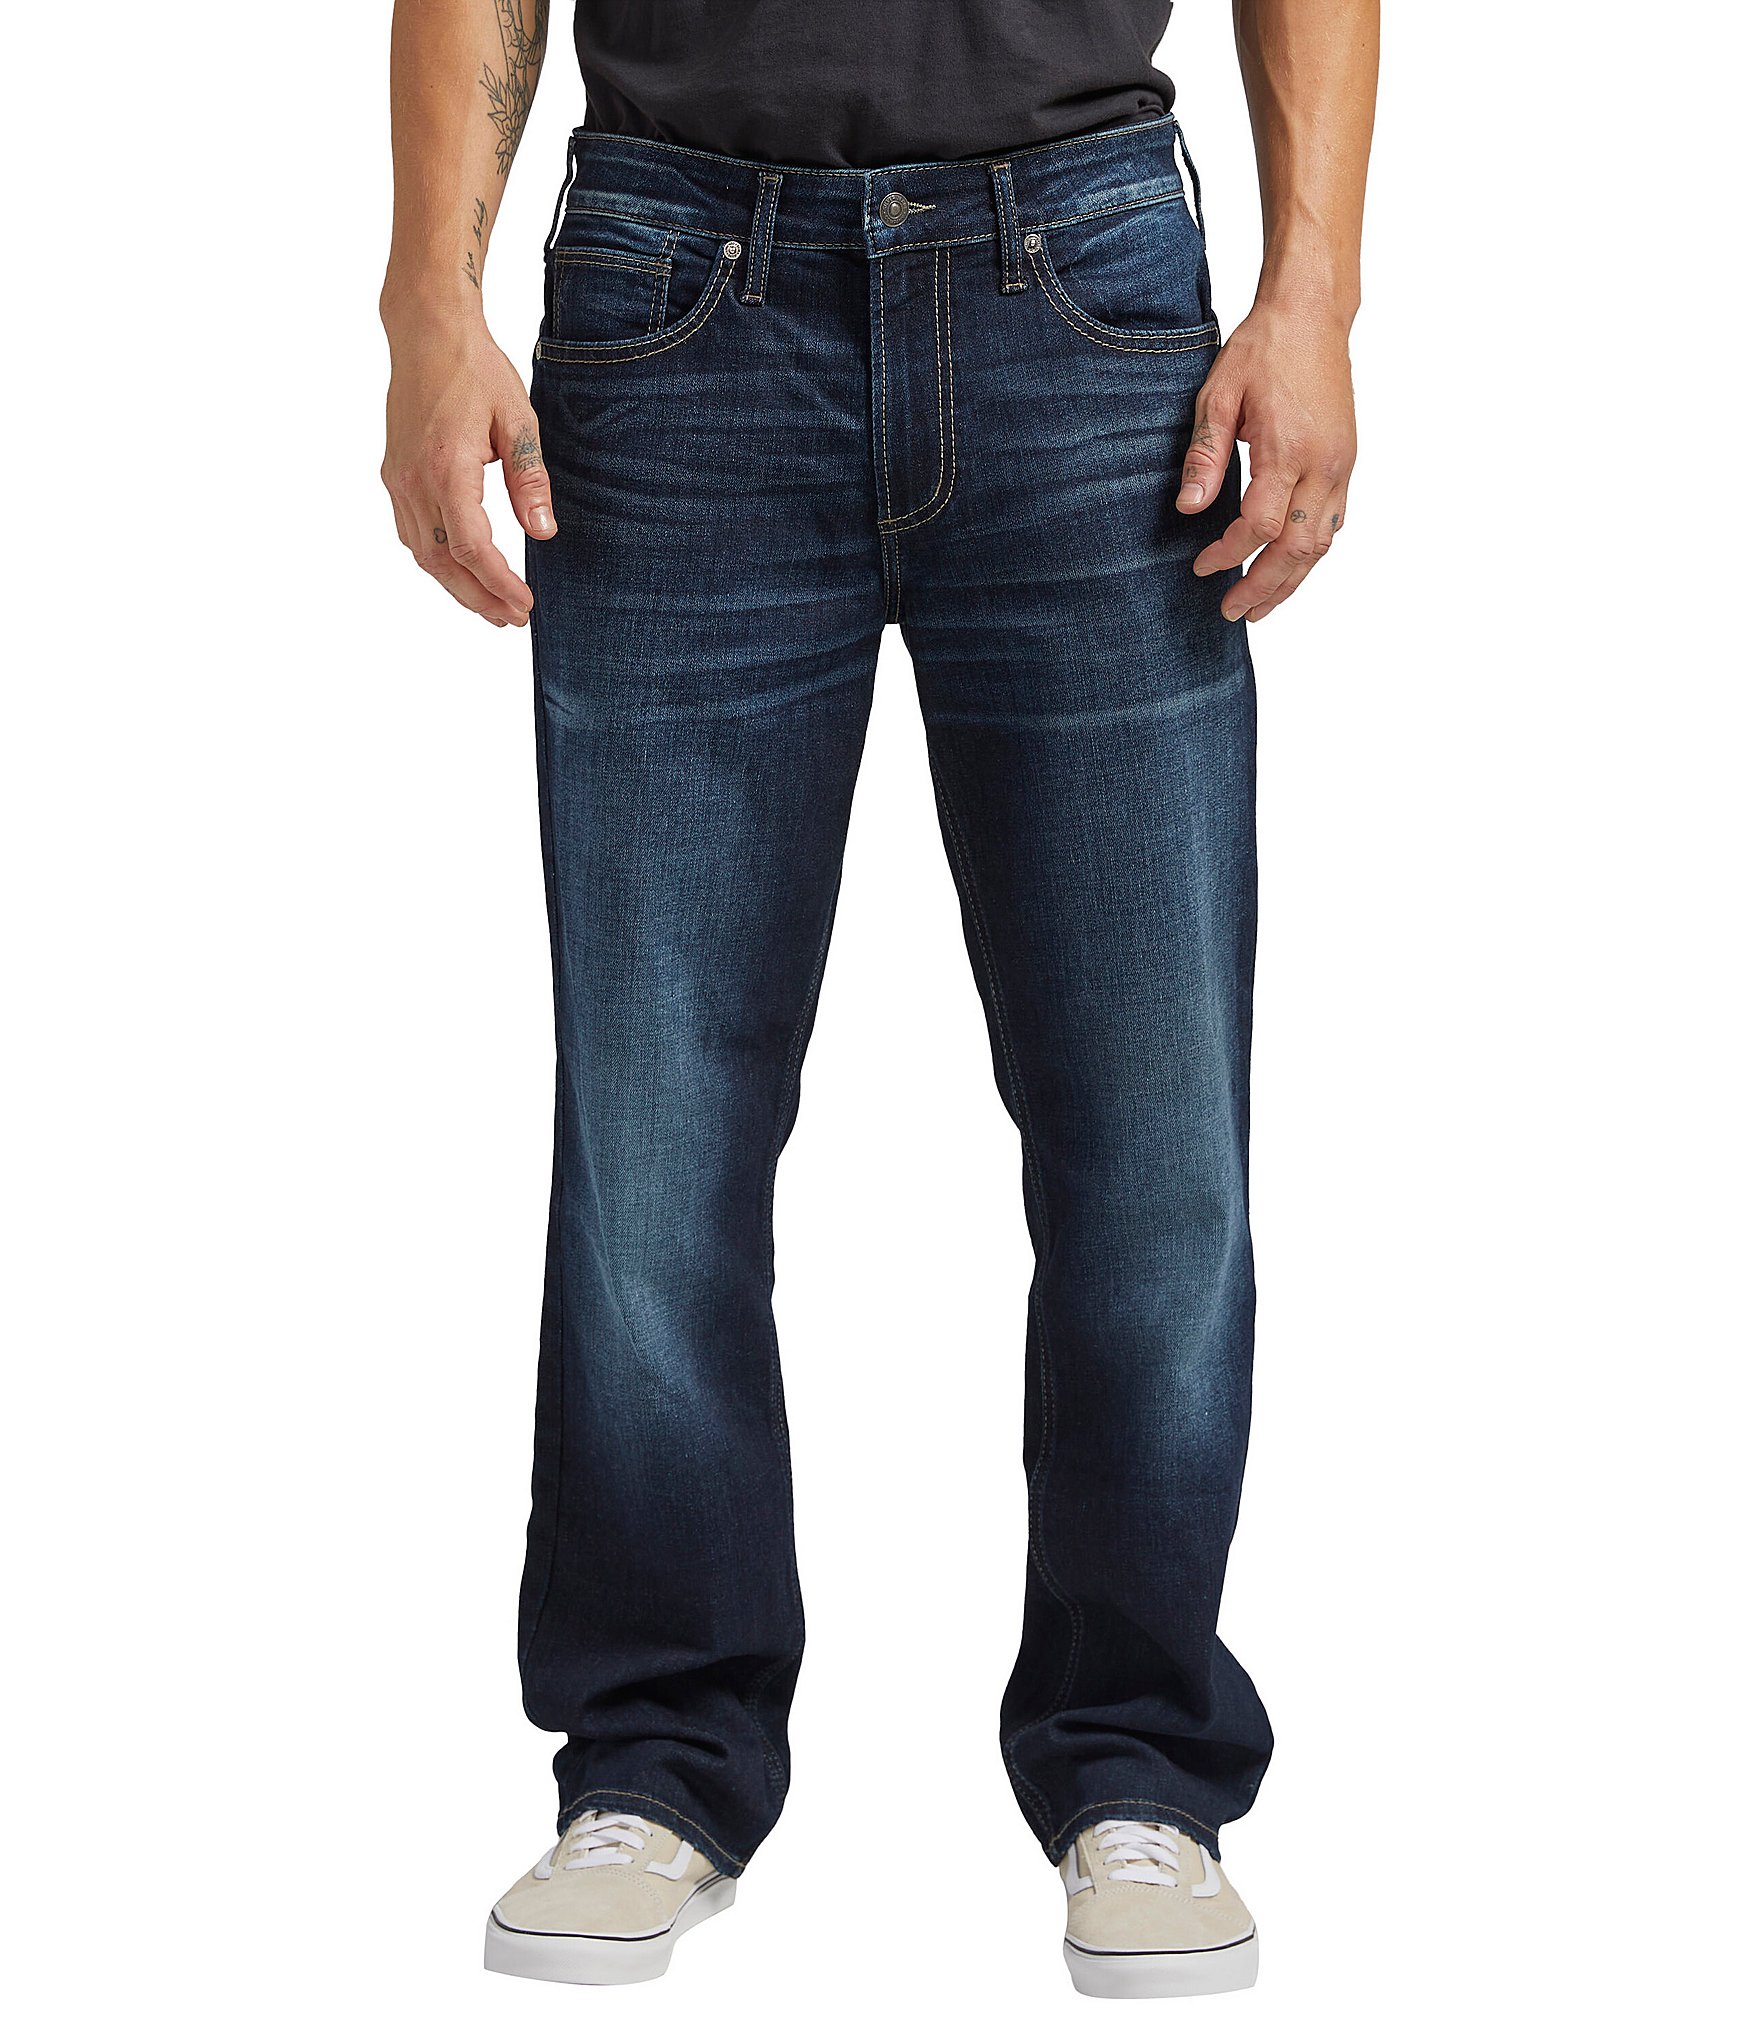 Silver Jeans Co. Grayson Straight Classic Fit Jeans | Dillard's